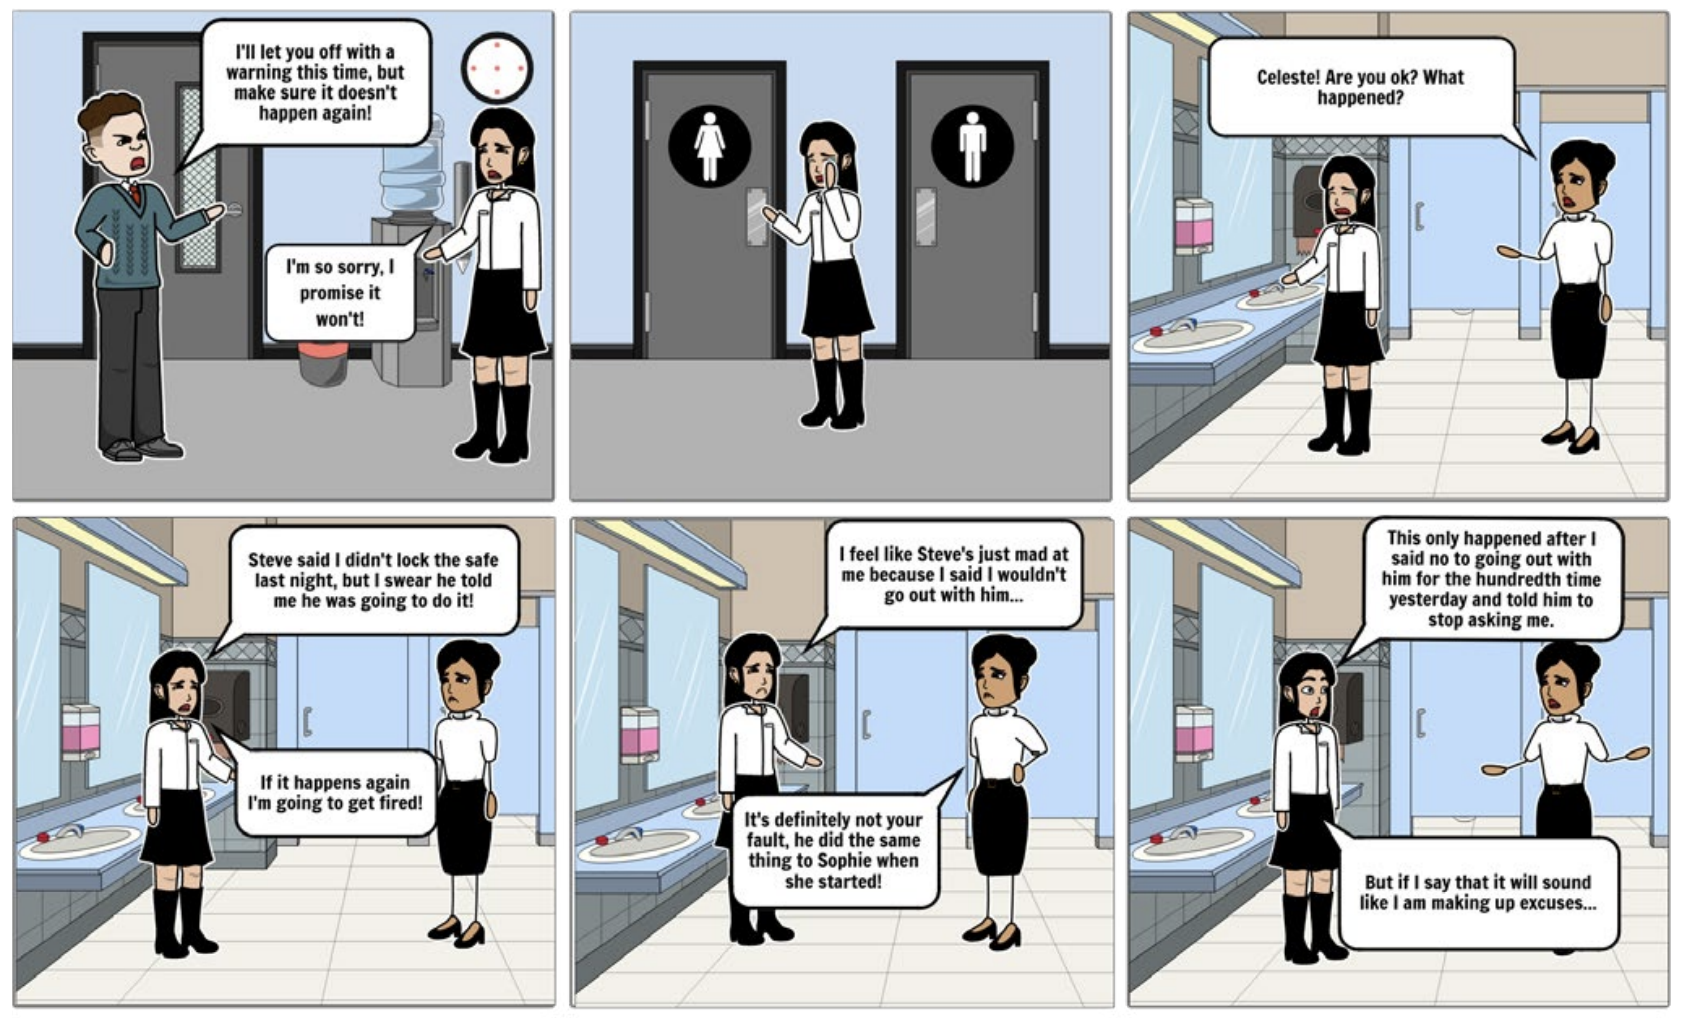 A comic strip featuring two people at work. A boss threatens a young woman, who has rejected to go on a date with him.